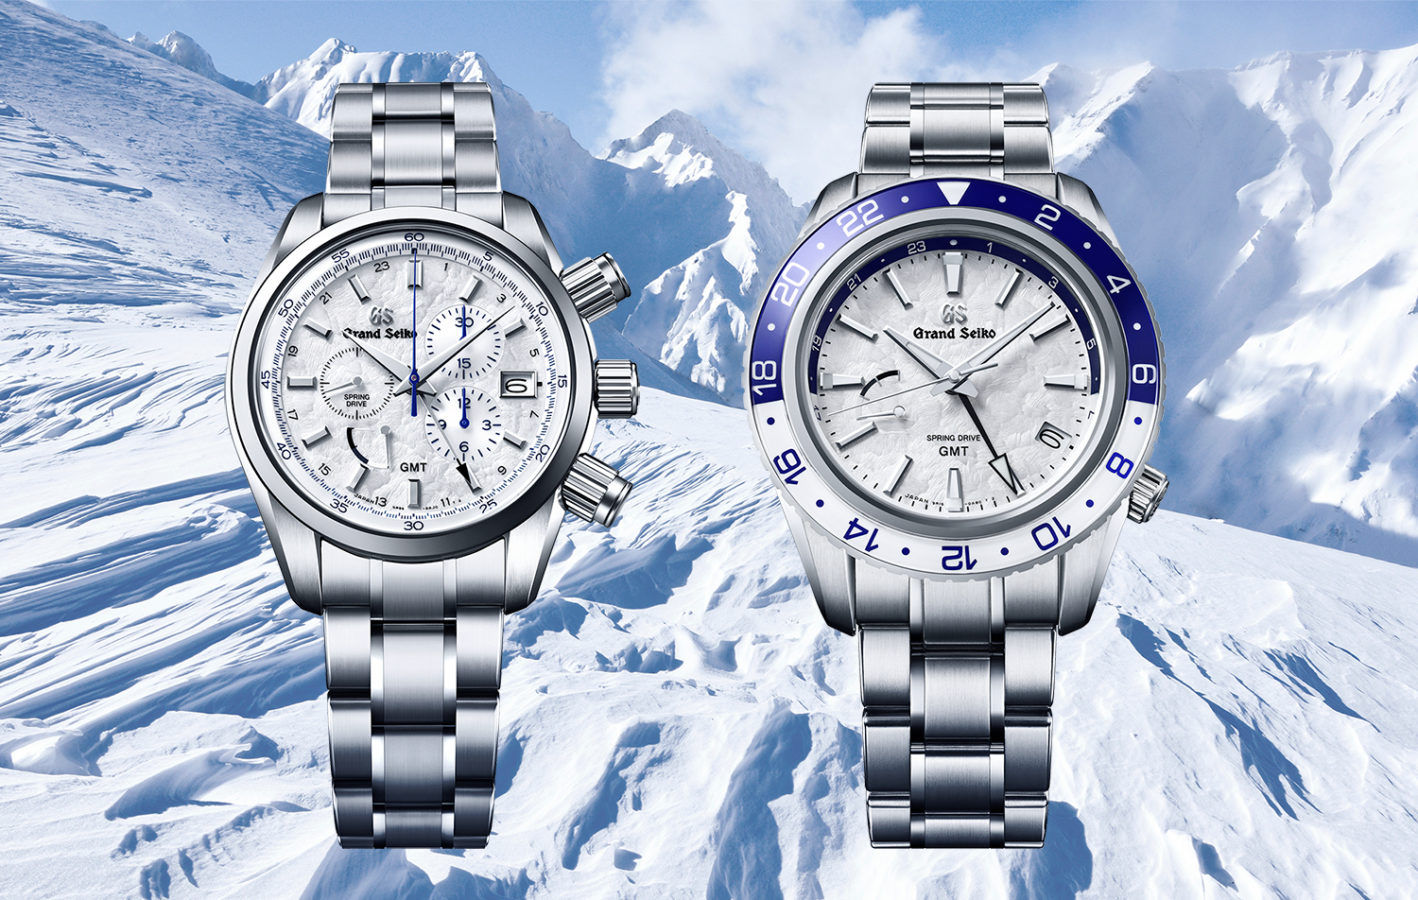 Grand Seiko Unveils Two Limited Edition Sport Watches Inspired by Winters in Shinshu